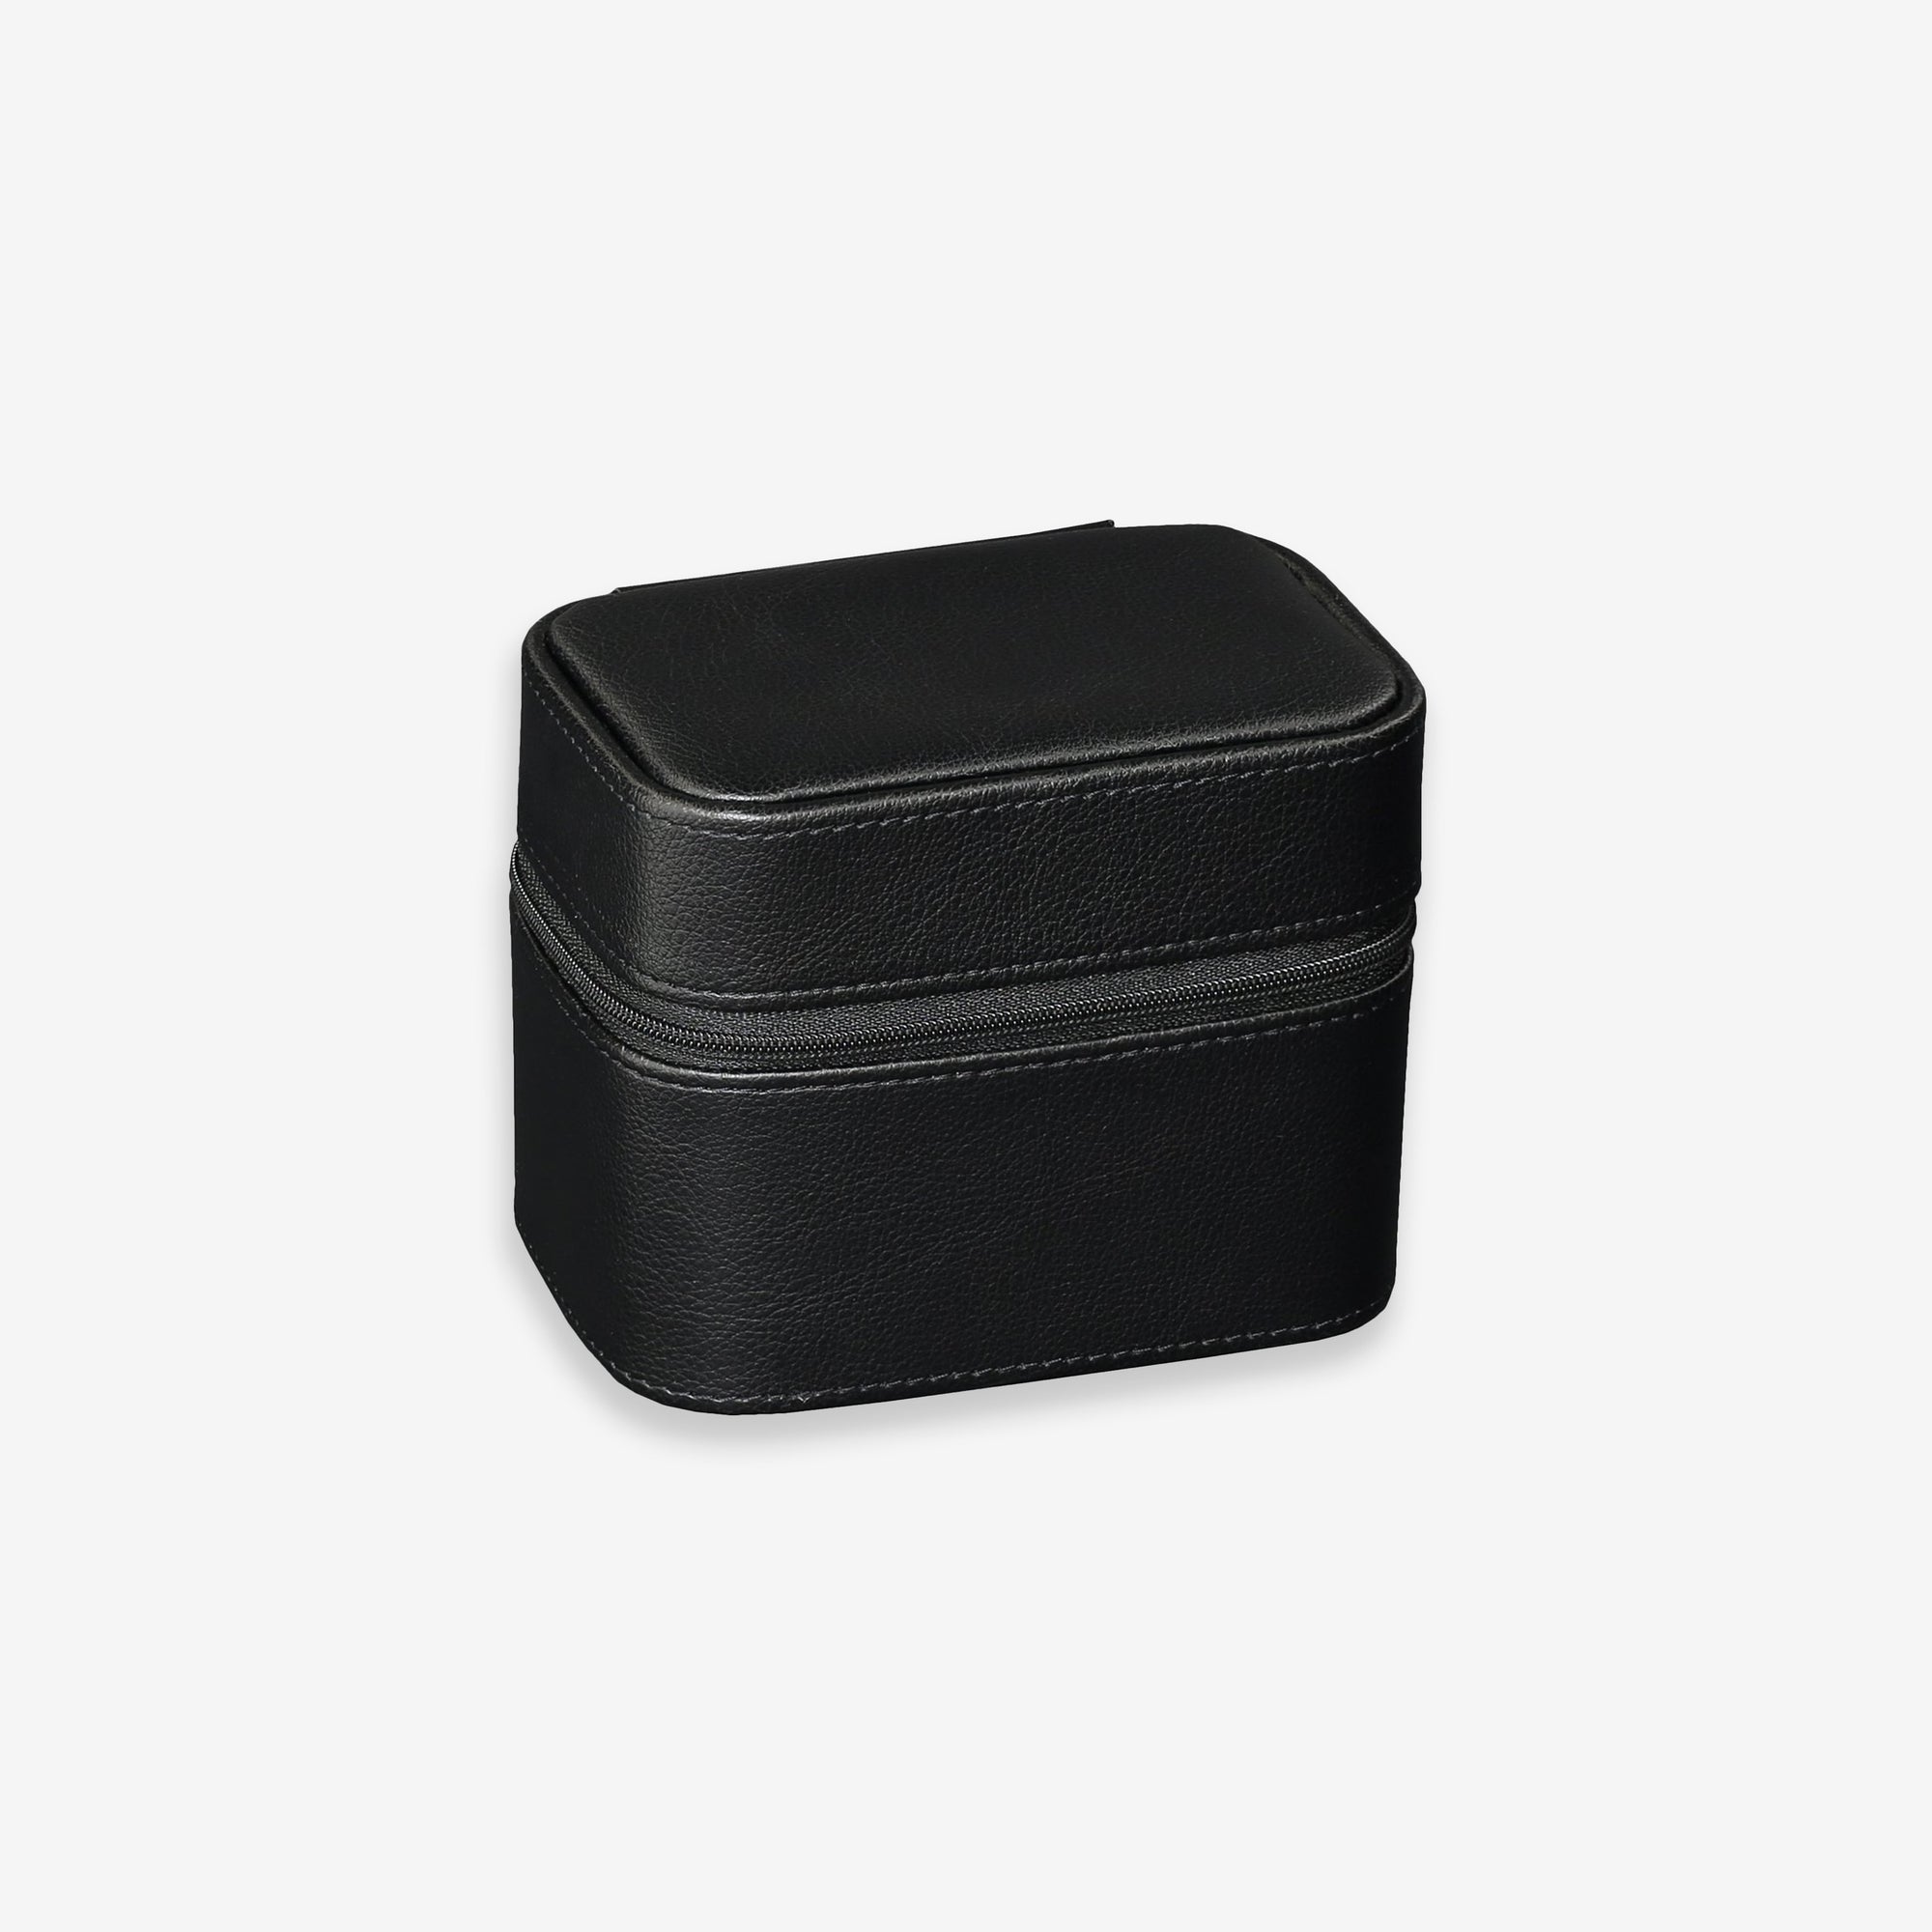 Watch box - Travel watch case for for 2 watches - Black